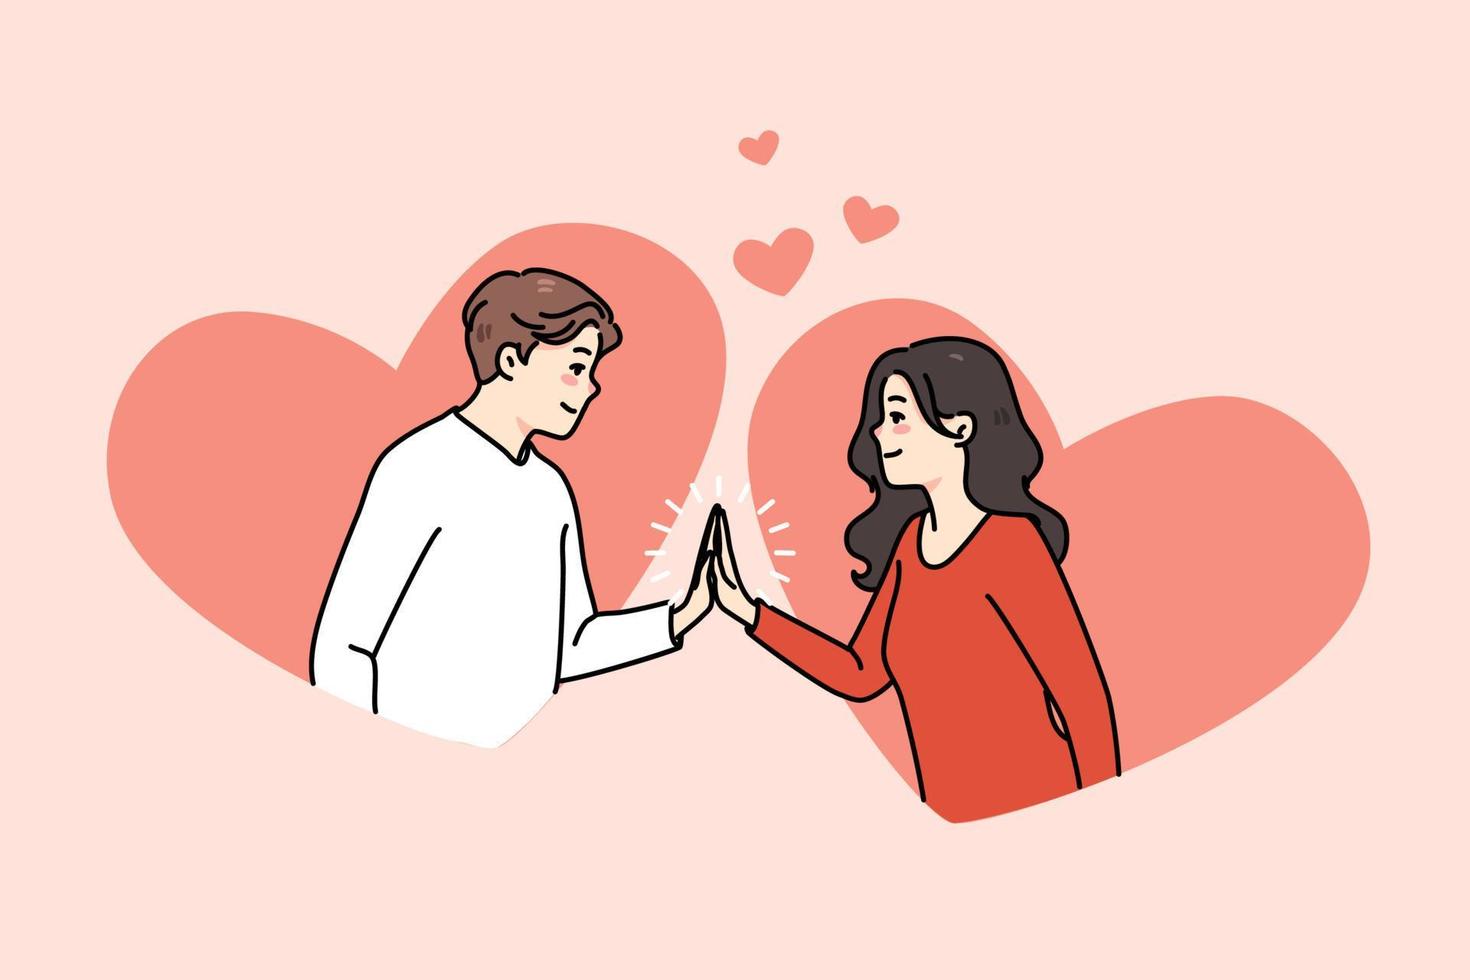 Happy young man and woman touch hands look in eyes feel in love. Smiling caring couple have close intimate bonding moment. Good relationships concept. Flat vector illustration.